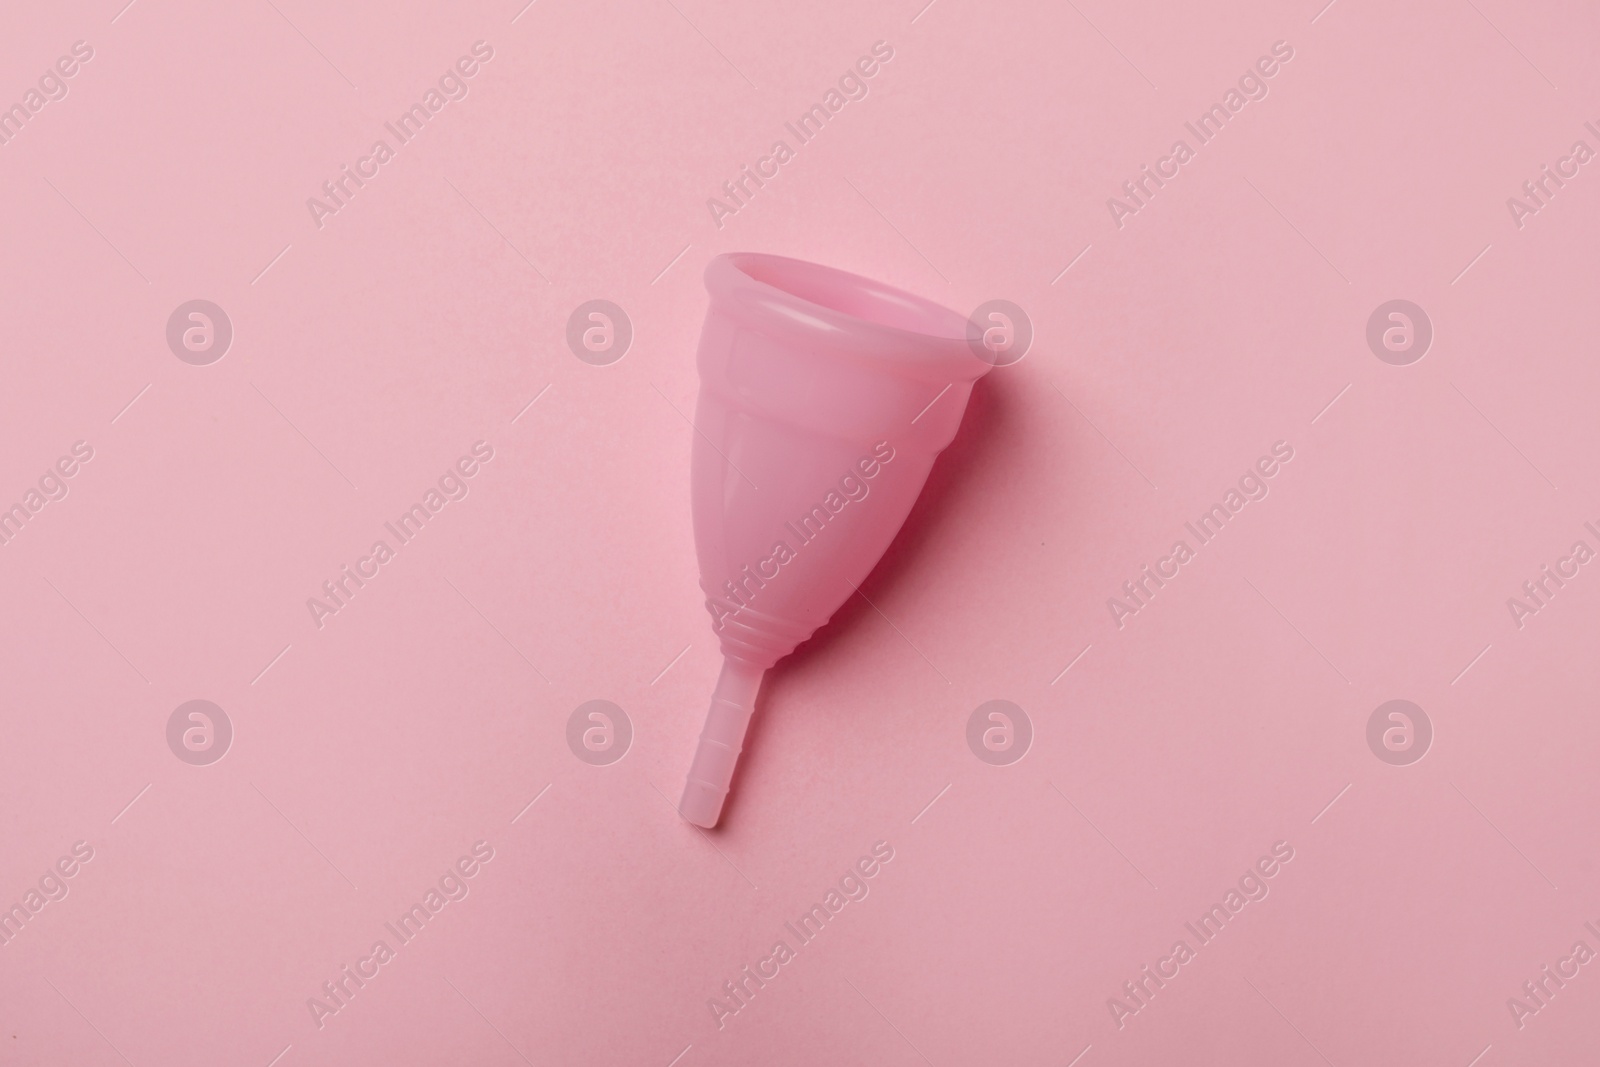 Photo of Menstrual cup on pink background, top view